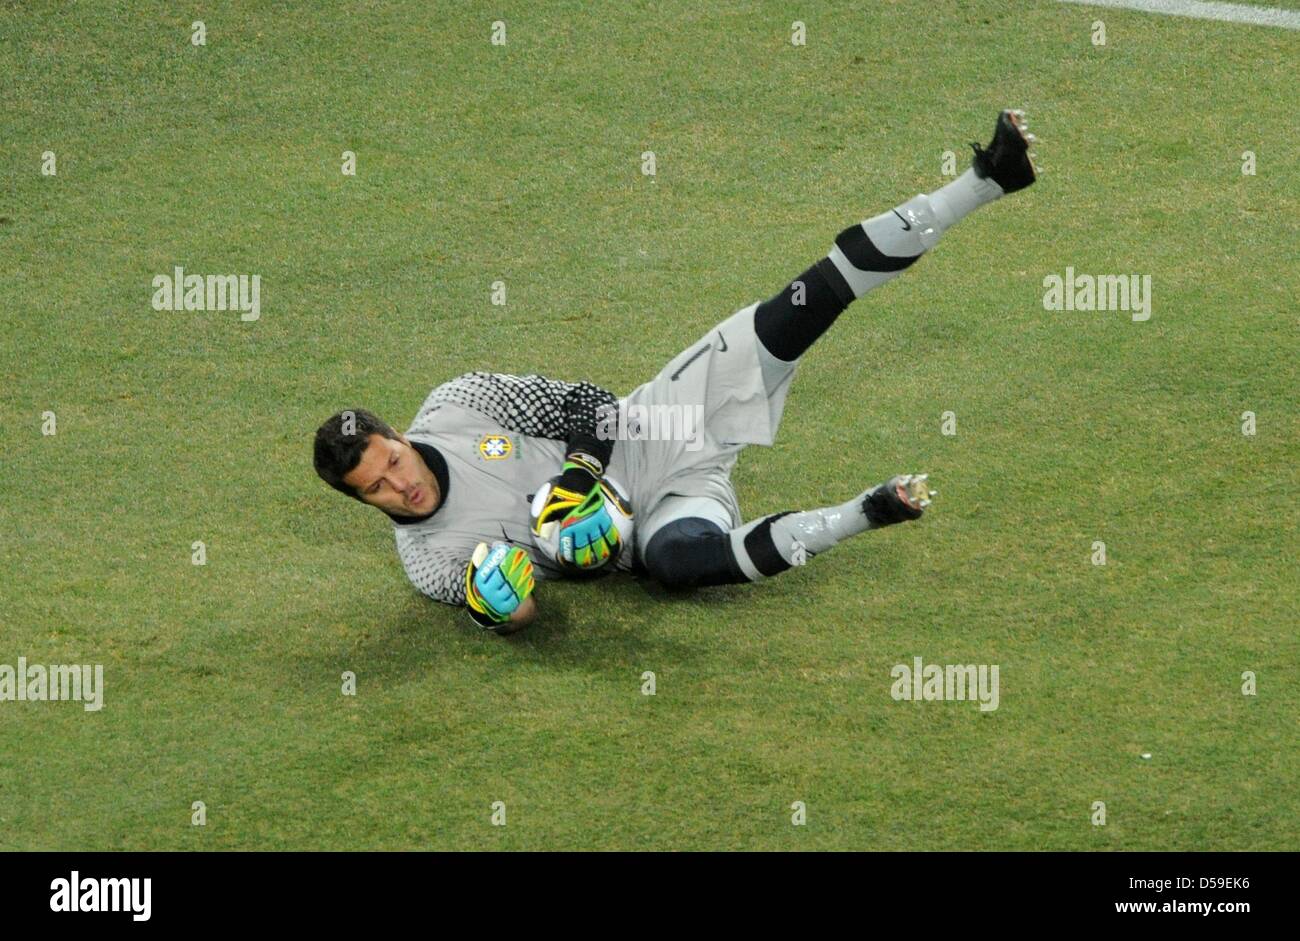 Brazil's goalkeeper Julio Cesar catches the ball during the 2010 FIFA World Cup group G match between Brazil and Ivory Coast at Soccer City Stadium in Johannesburg, South Africa 20 June 2010. Photo: Marcus Brandt dpa - Please refer to http://dpaq.de/FIFA-WM2010-TC Stock Photo